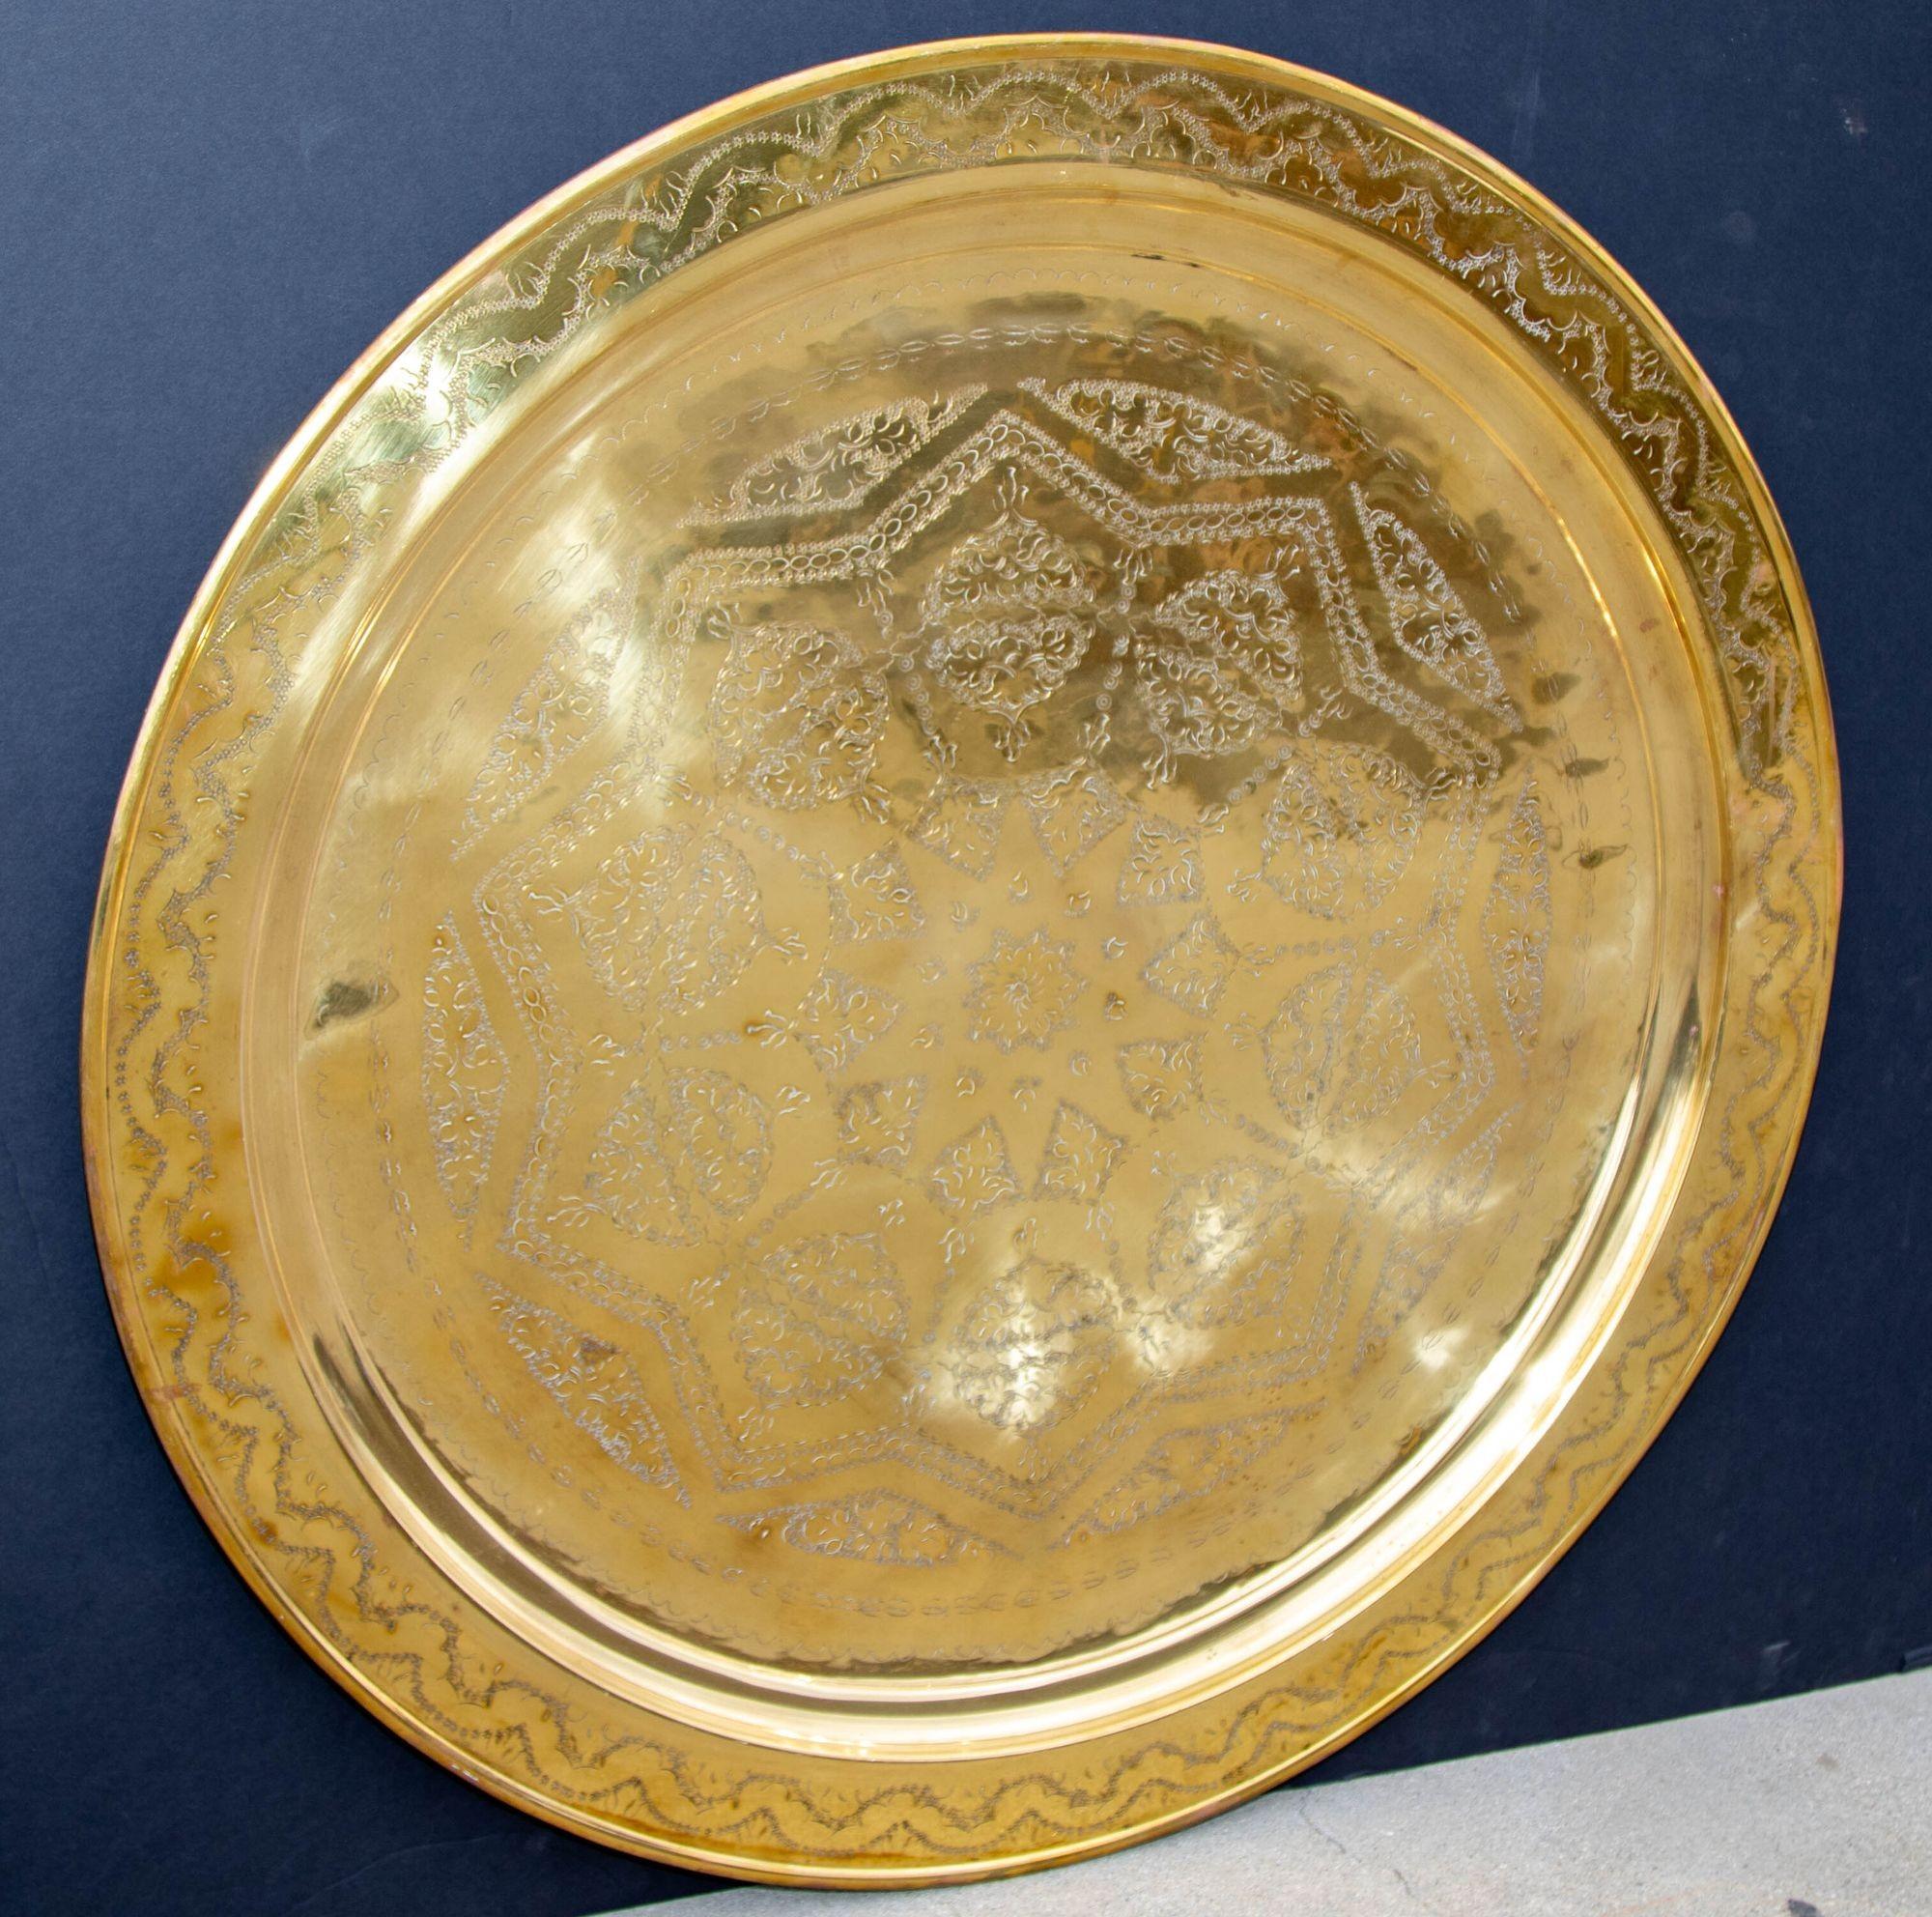 19th Century Antique Oversized Round Moroccan Polished Brass Tray Platter 19th C. For Sale